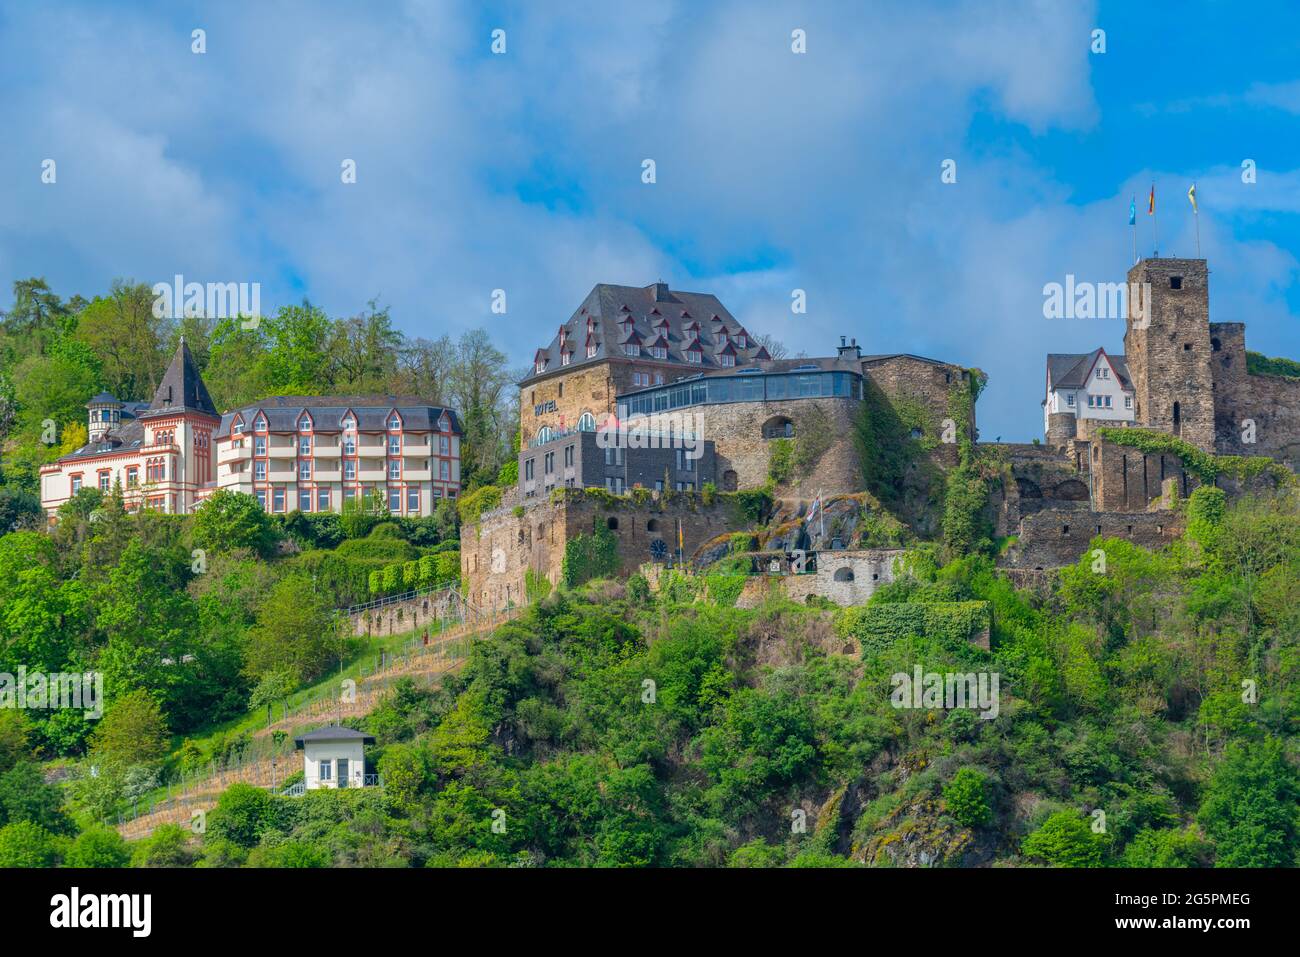 Mighty medieval fortress Rheinfels Castle at the Rhine castle trail in St. Goar, Upper Middle Rhine Valley, UNESCO World Heritage, Germany Stock Photo